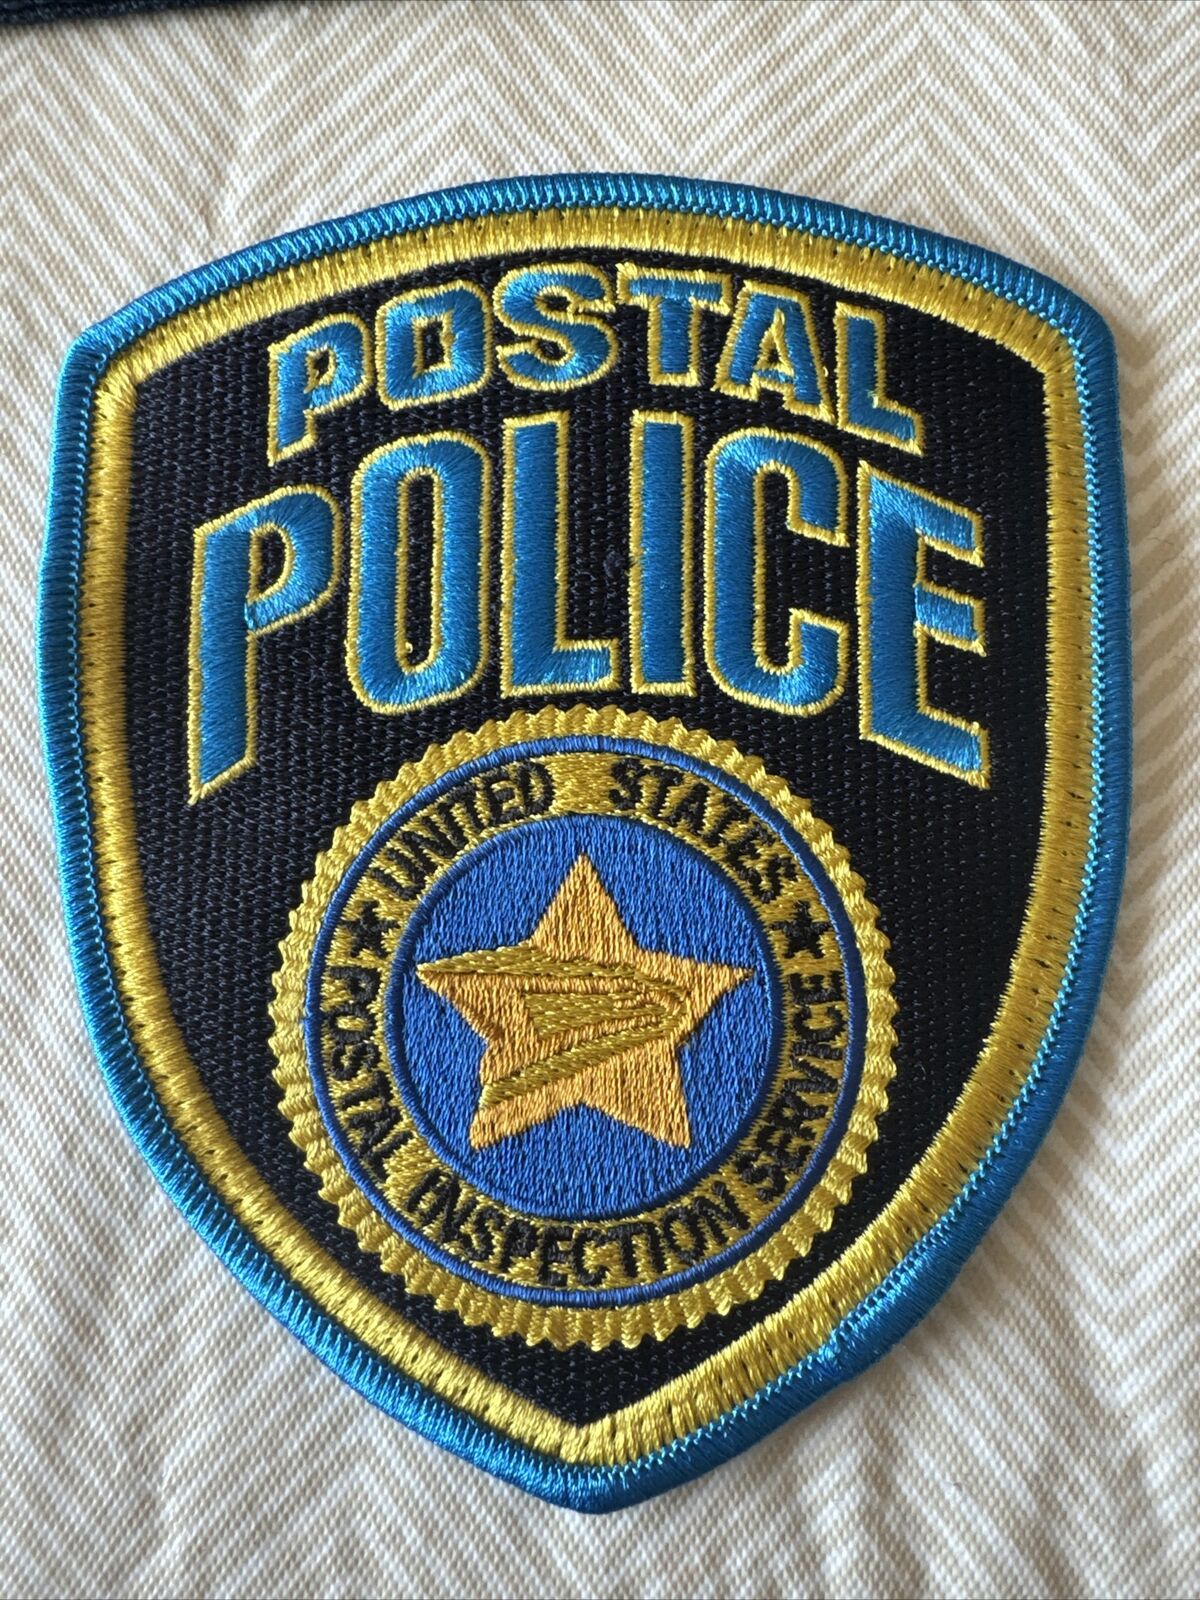 U.S POSTAL POLICE Patch Rare Collectible Use ONLY